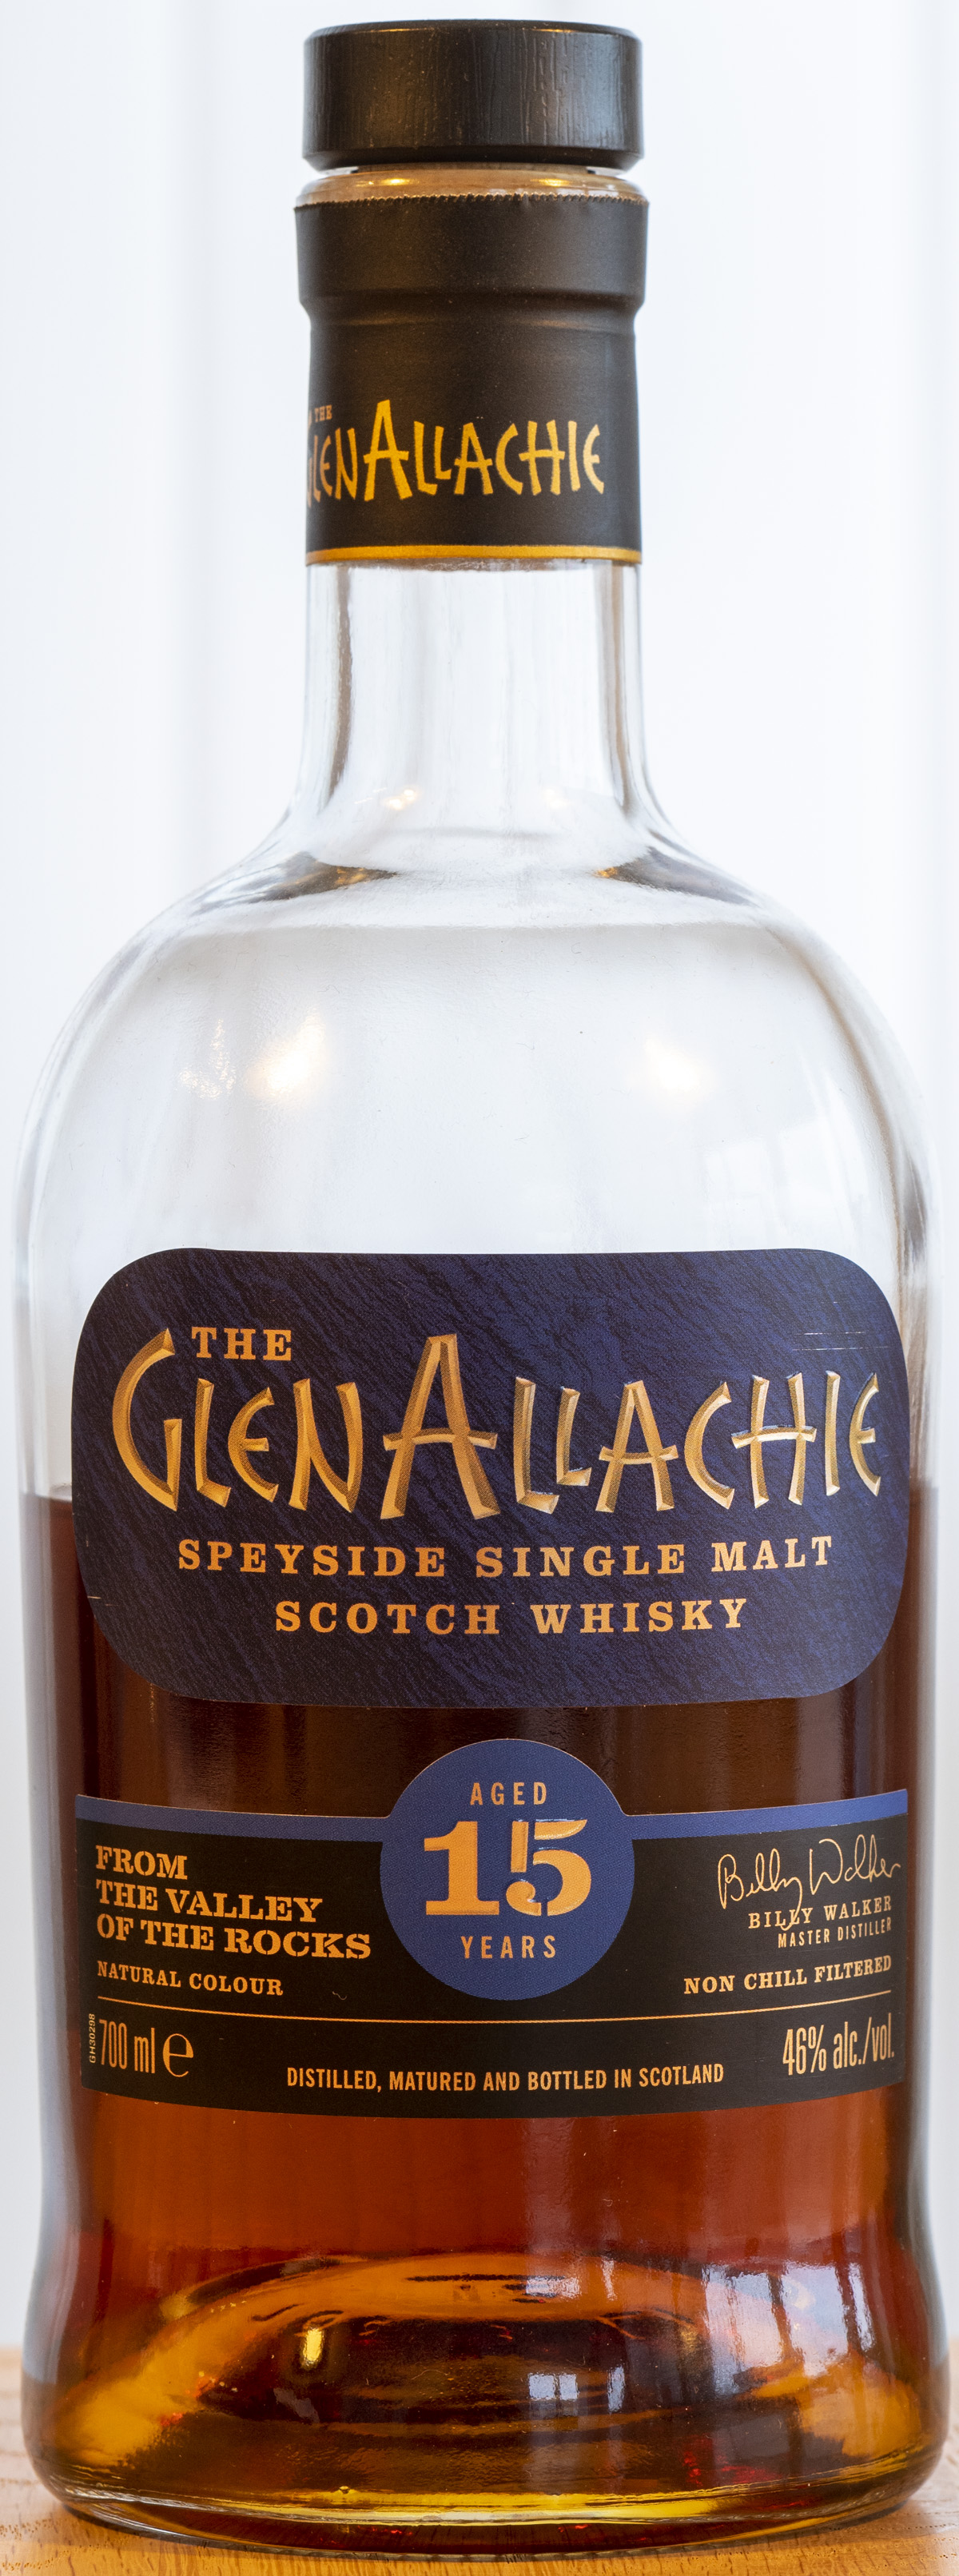 Billede: PHC_3947 - The GlenAllachie 15 Years Old - front.jpg